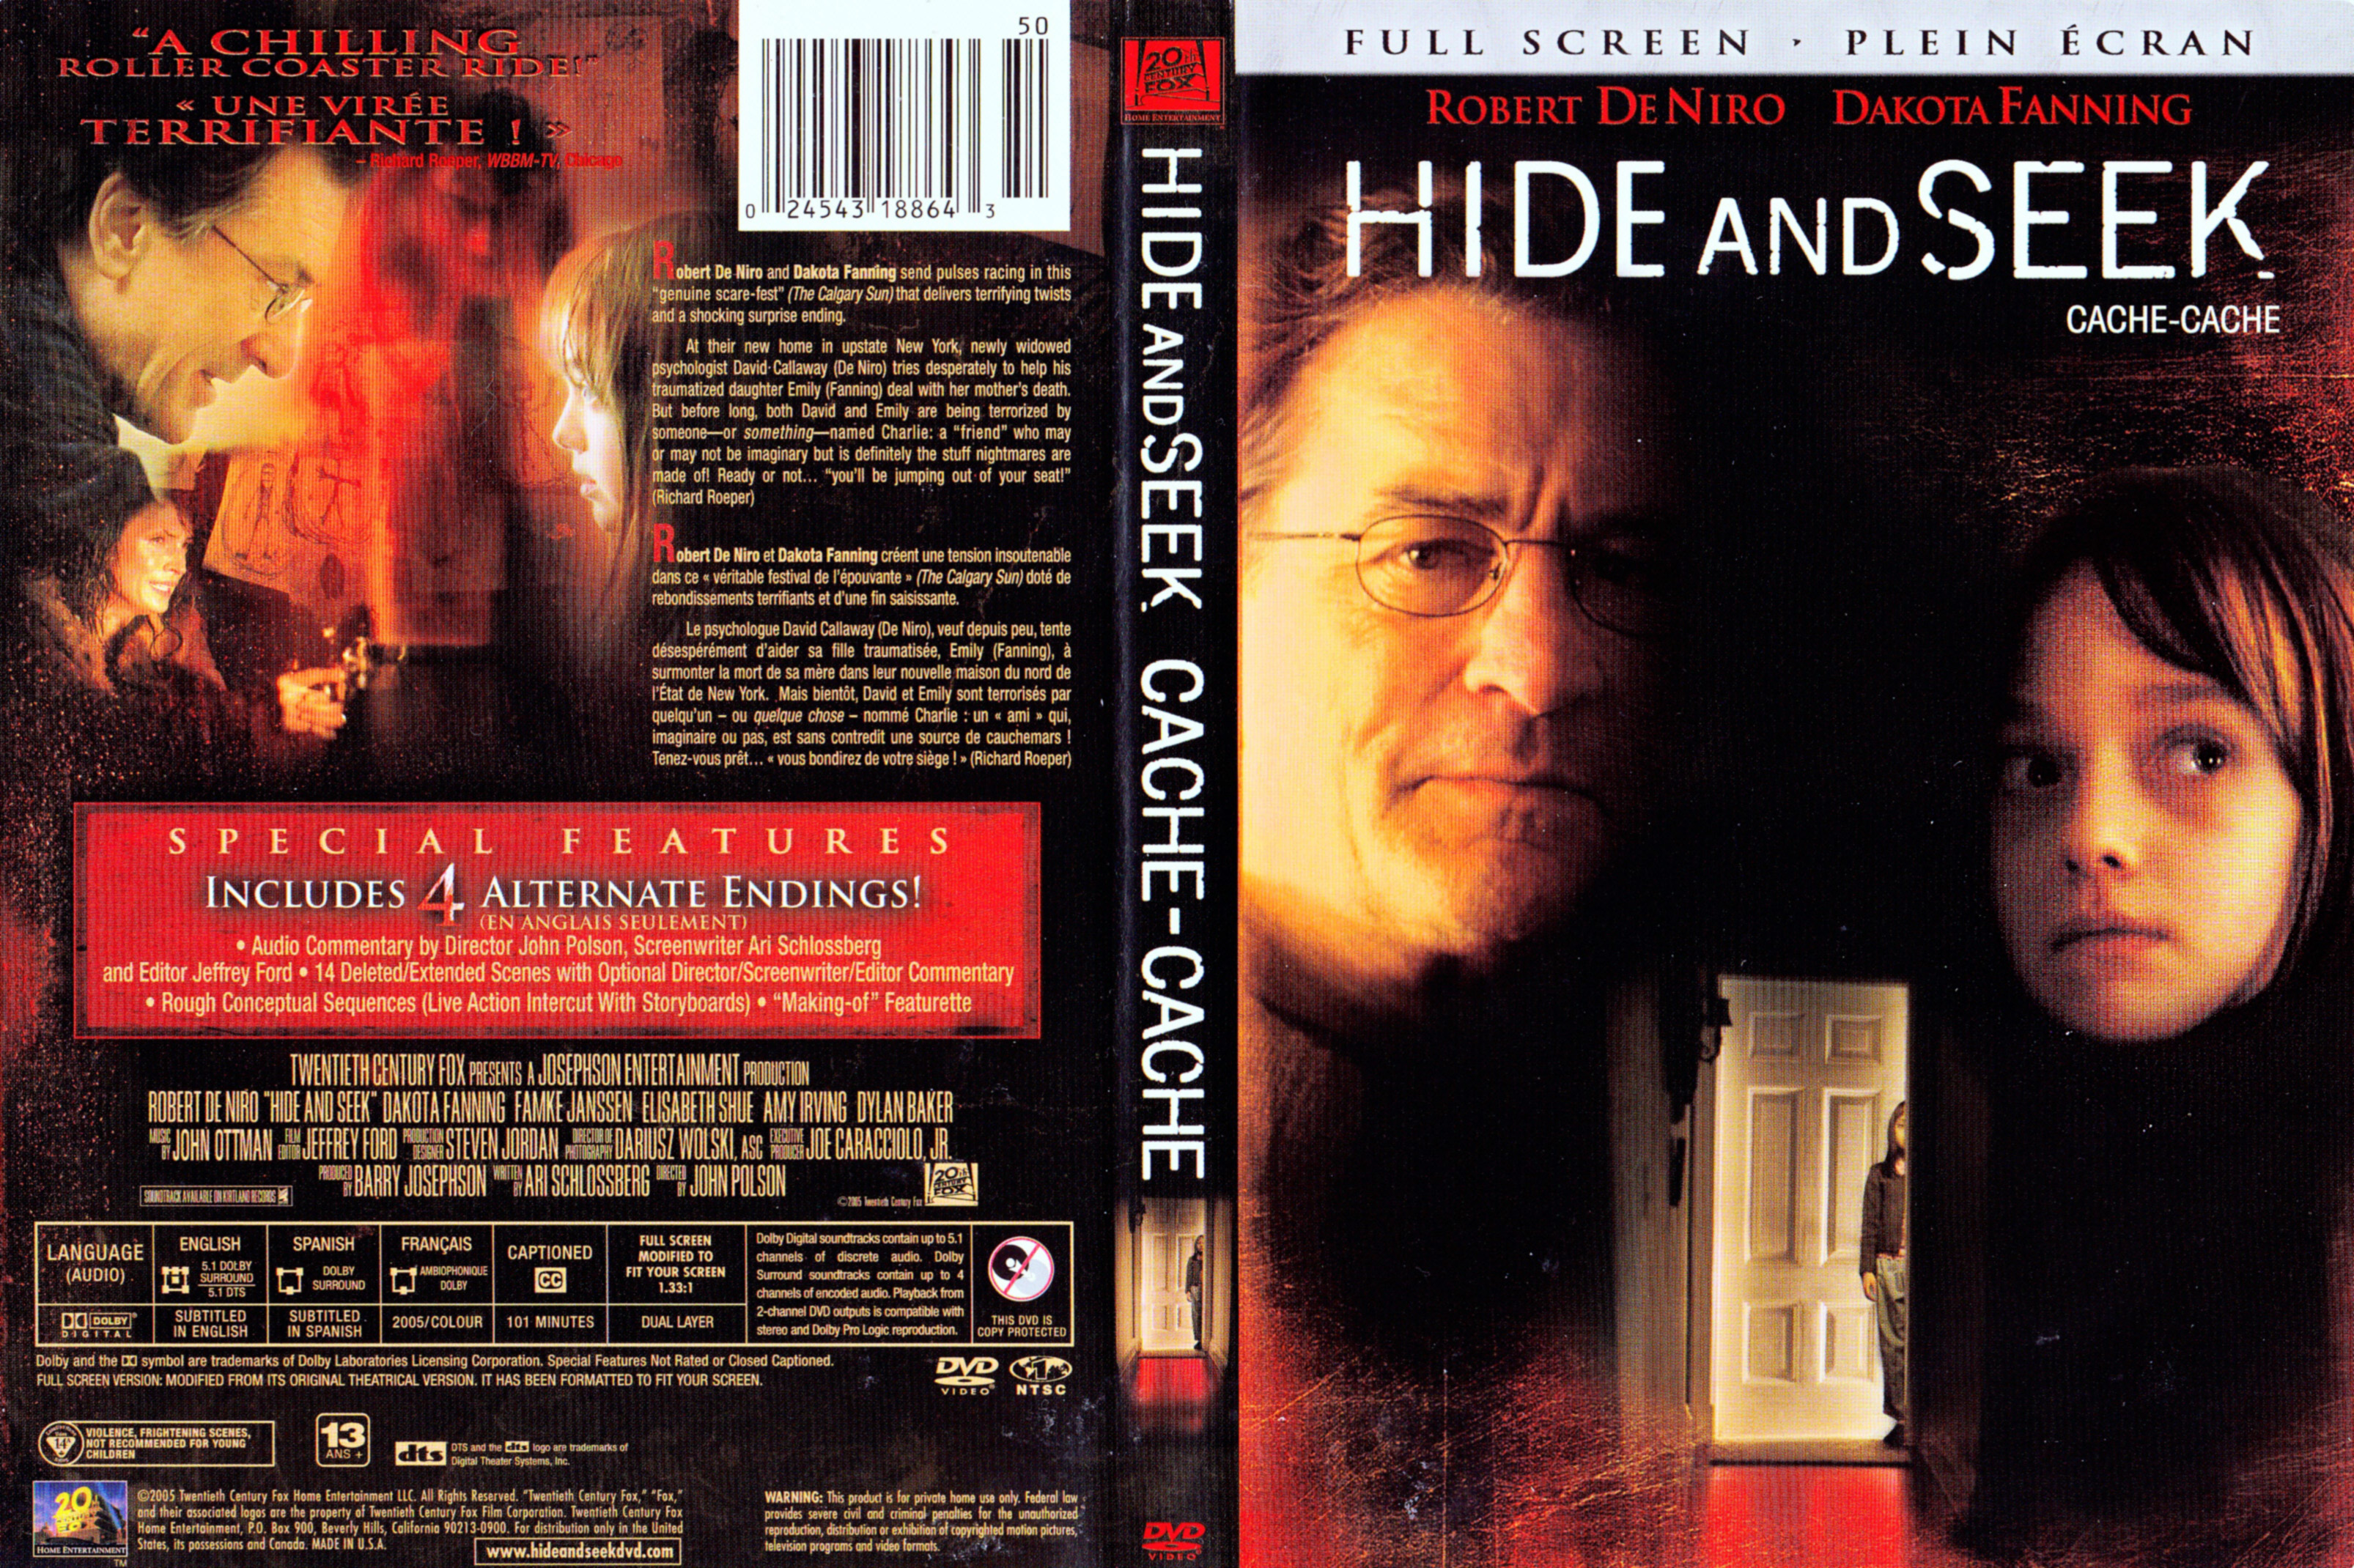 Jaquette DVD Hide and seek - Cache cache (Canadienne)